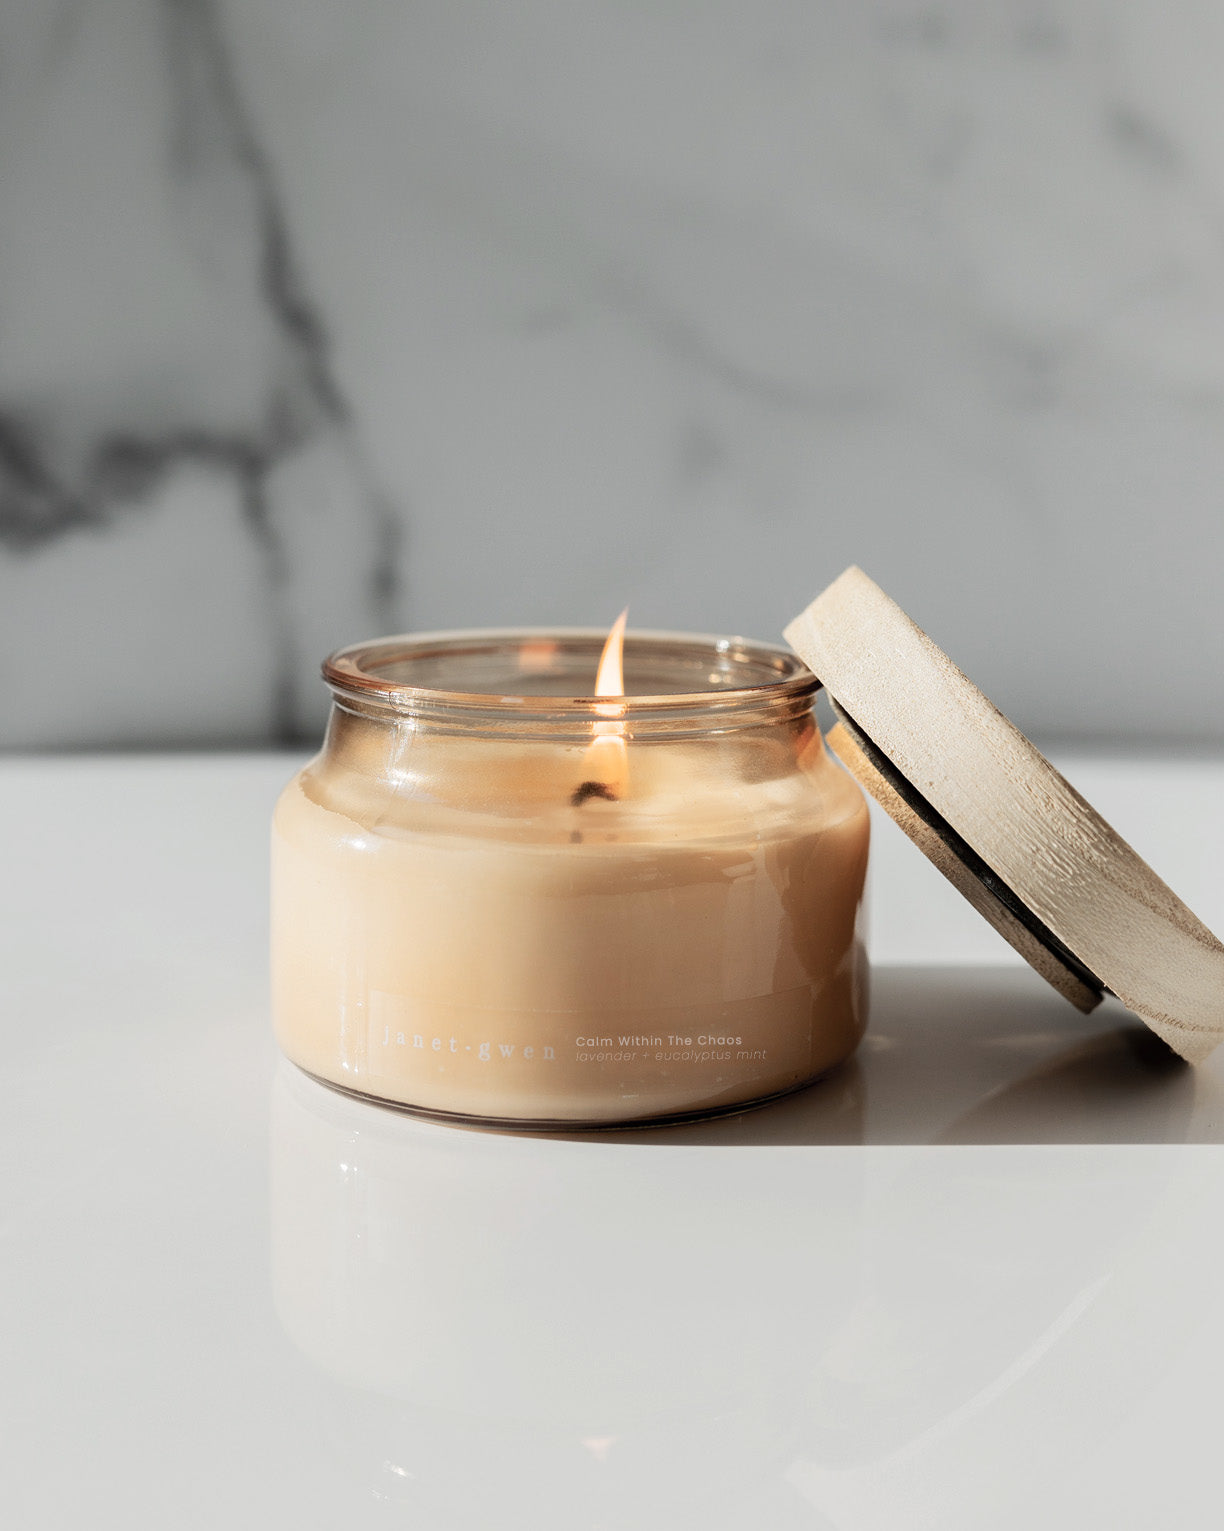 Calm Within the Chaos Coconut Soy Candle - Glass Jar